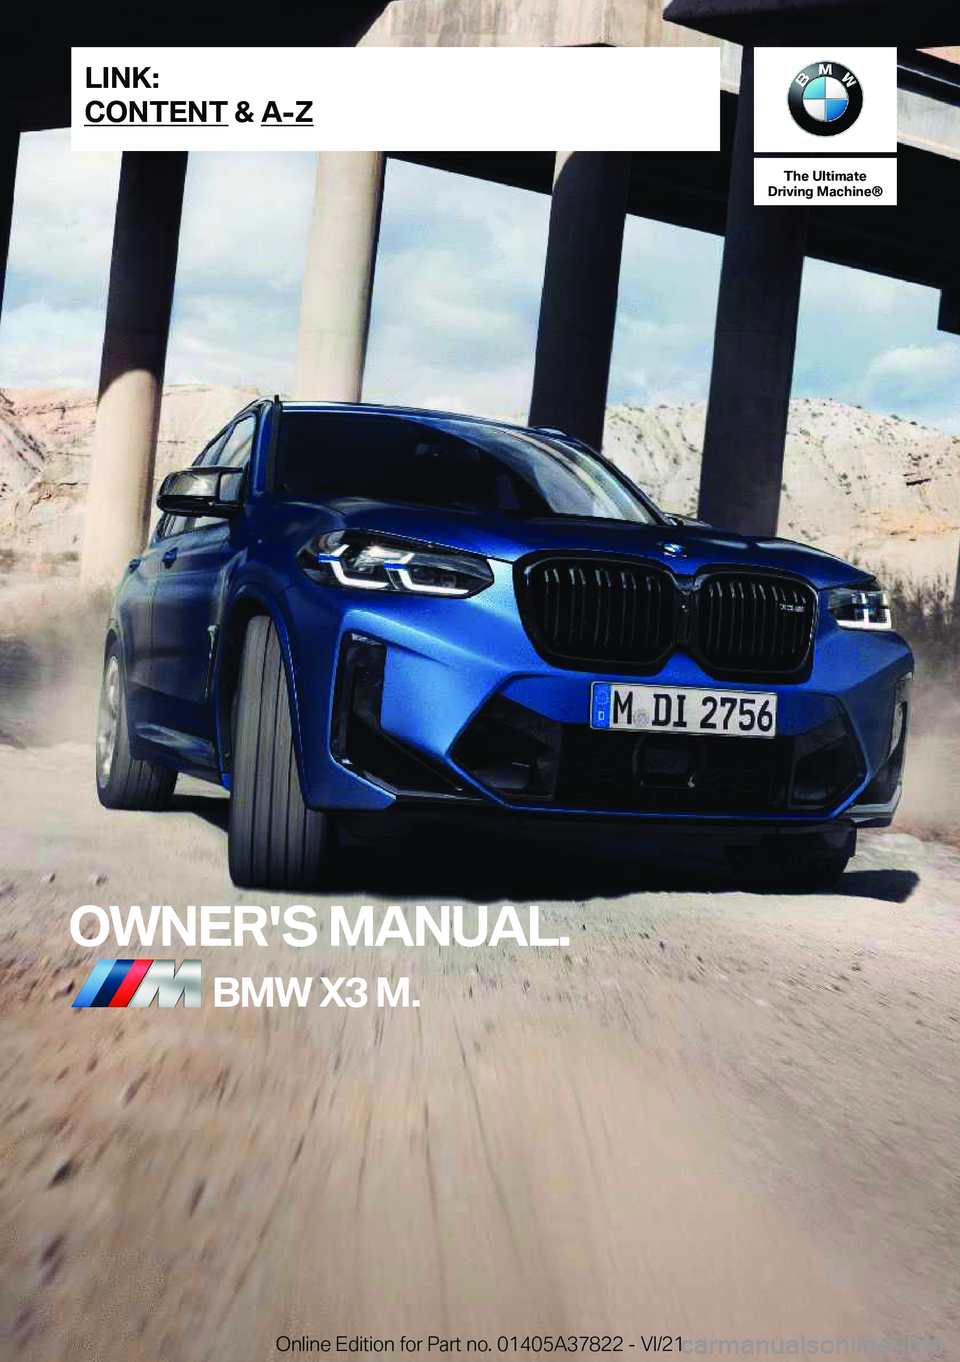 BMW X3 M 2022  Owners Manual �T�h�e��U�l�t�i�m�a�t�e
�D�r�i�v�i�n�g��M�a�c�h�i�n�e�n
�O�W�N�E�R�'�S��M�A�N�U�A�L�.�B�M�W��X�3��M�.�L�I�N�K�:
�C�O�N�T�E�N�T��&��A�-�Z�O�n�l�i�n�e��E�d�i�t�i�o�n��f�o�r��P�a�r�t��n�o�